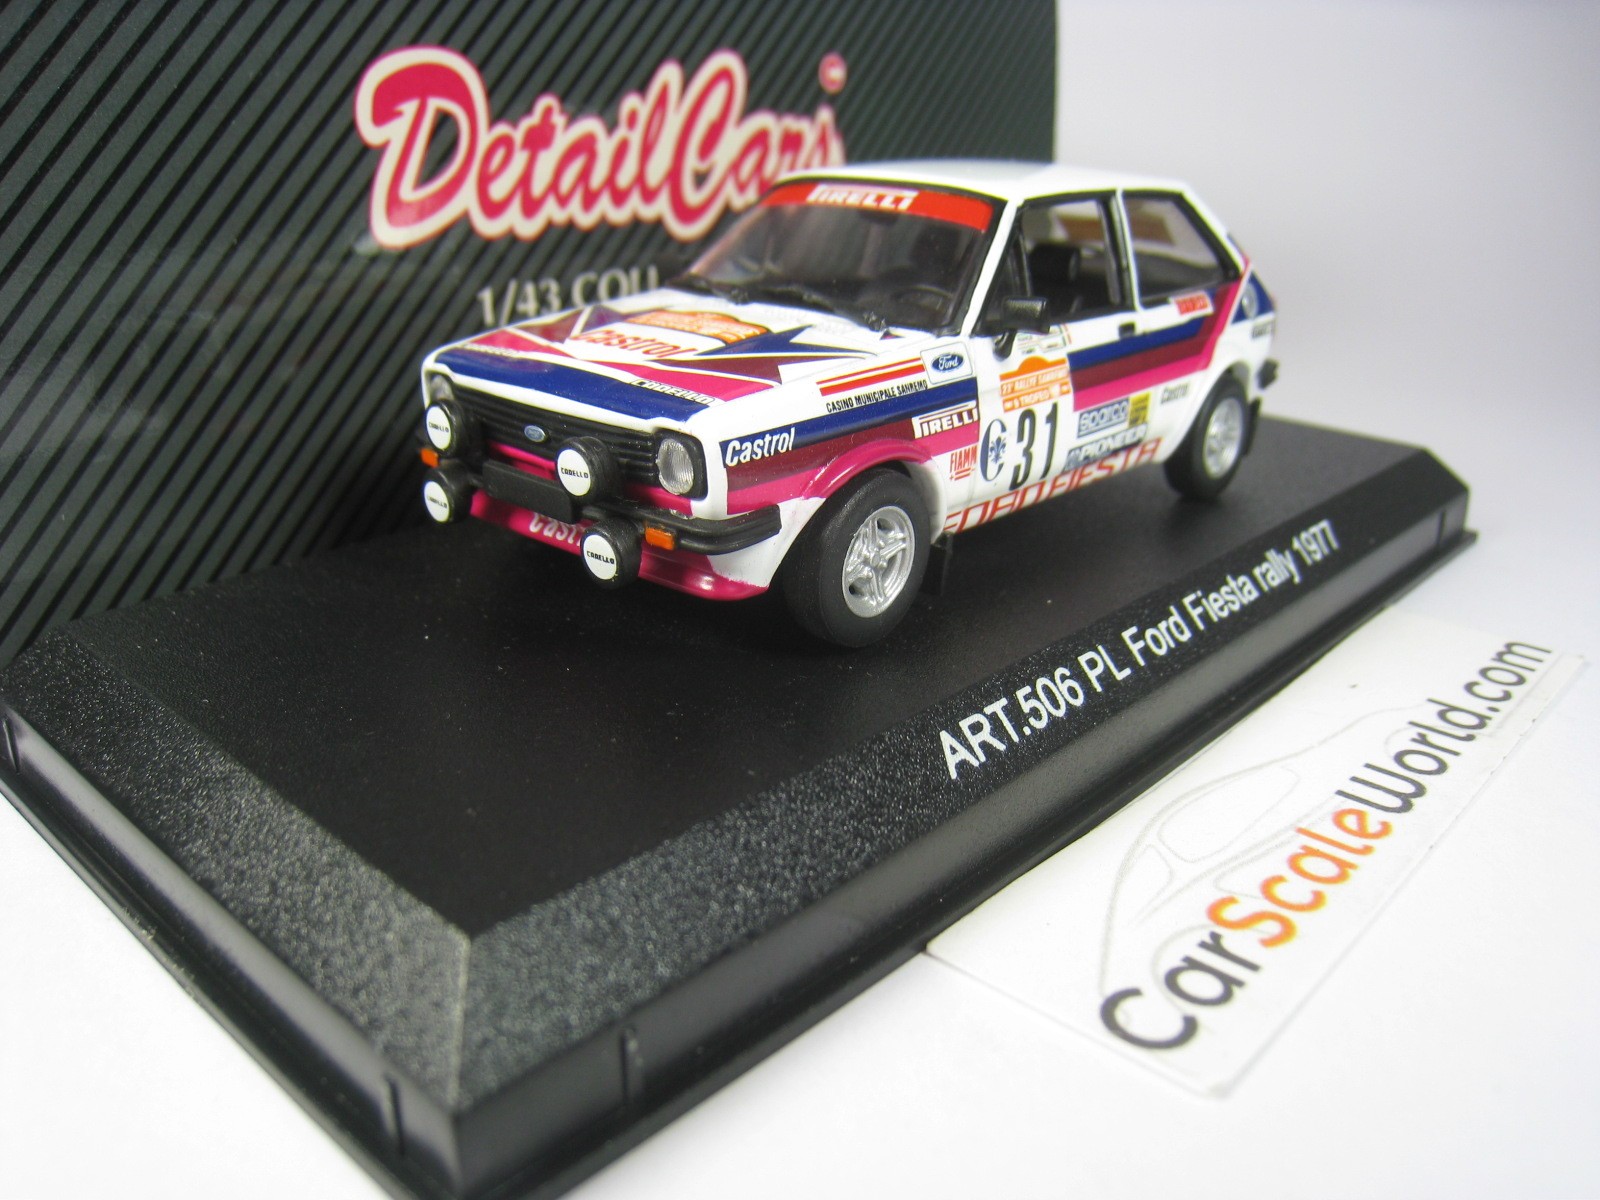 DetailCars 506 1/43 フォード Ford Fiesta rally 1977 ＃31